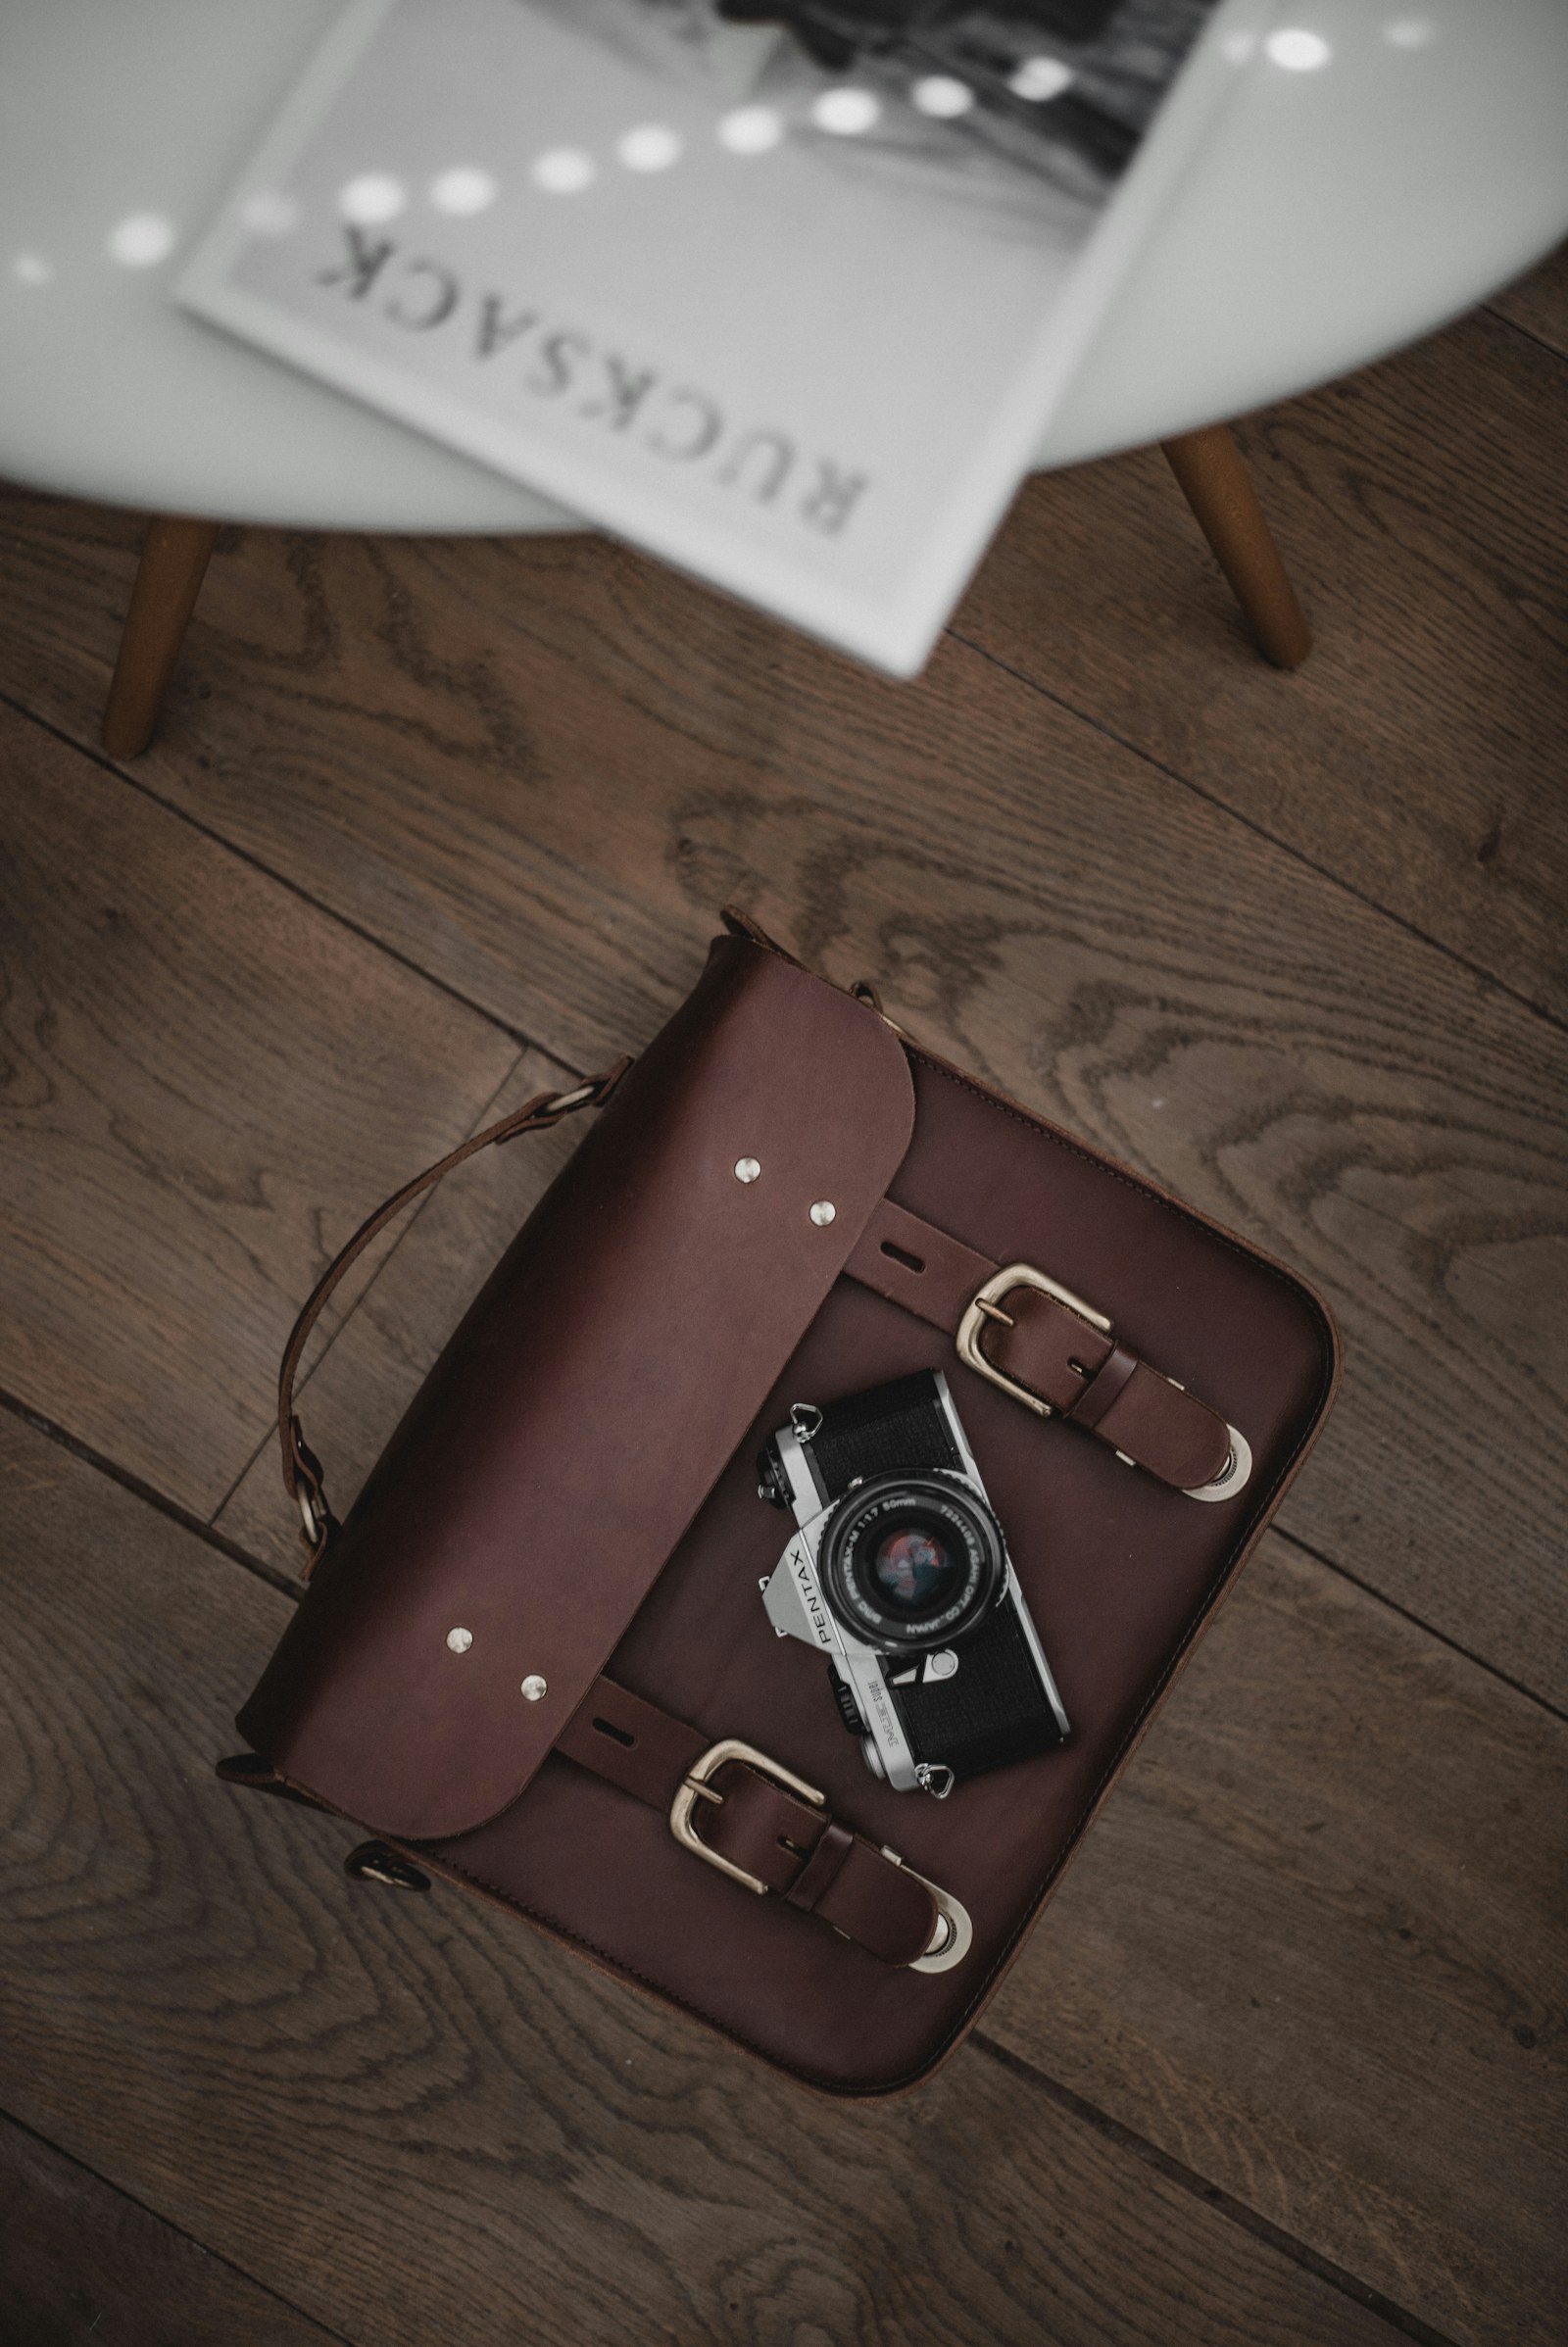 Summicron-M 1:2/50 sample photo. Brown leather case on photography